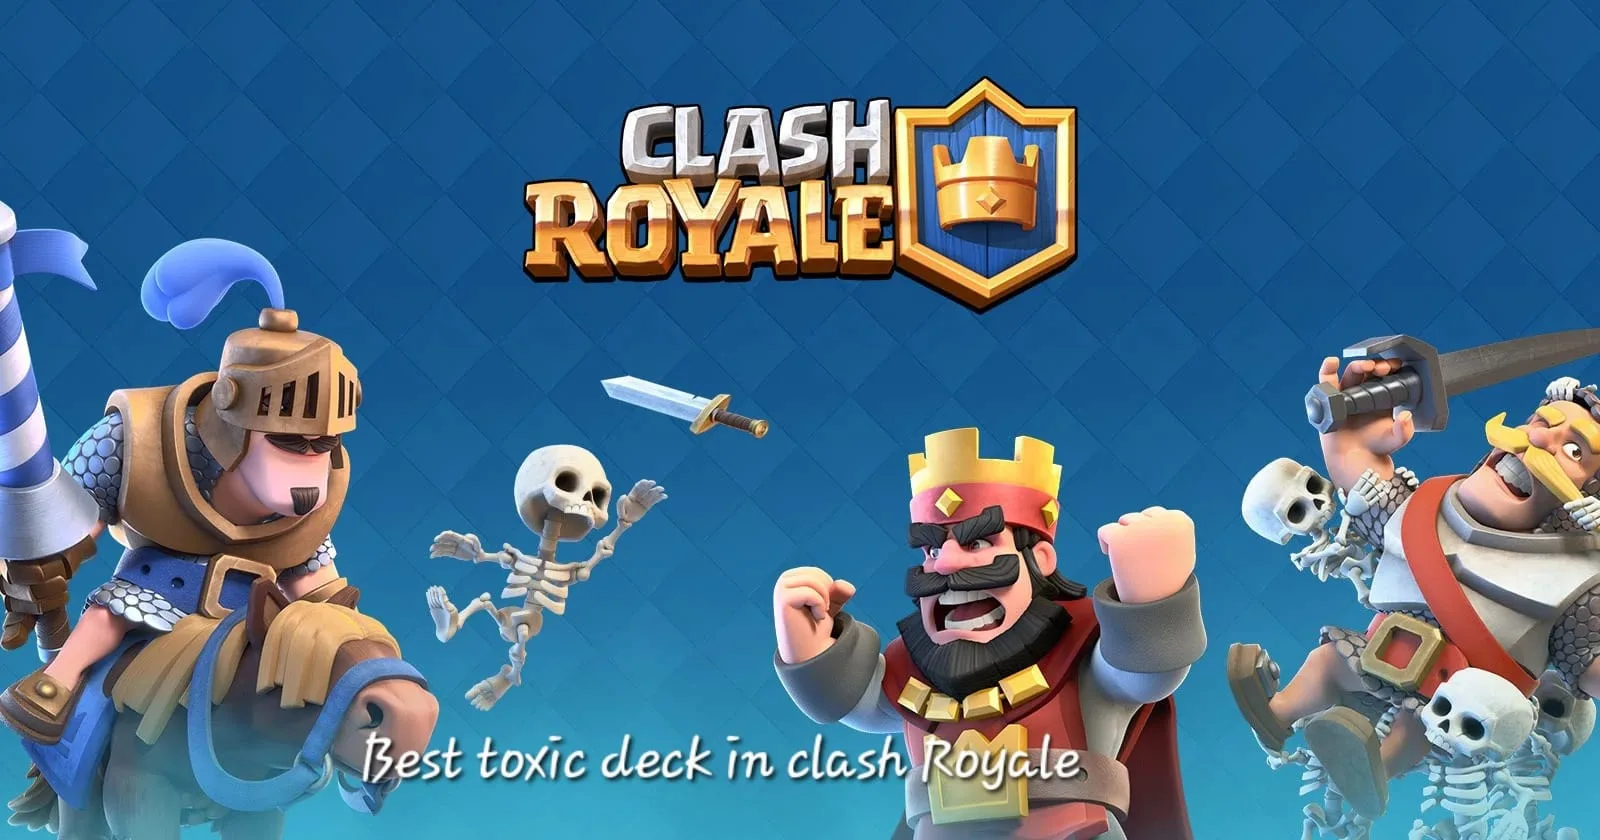 The Toxic Clash Royale deck